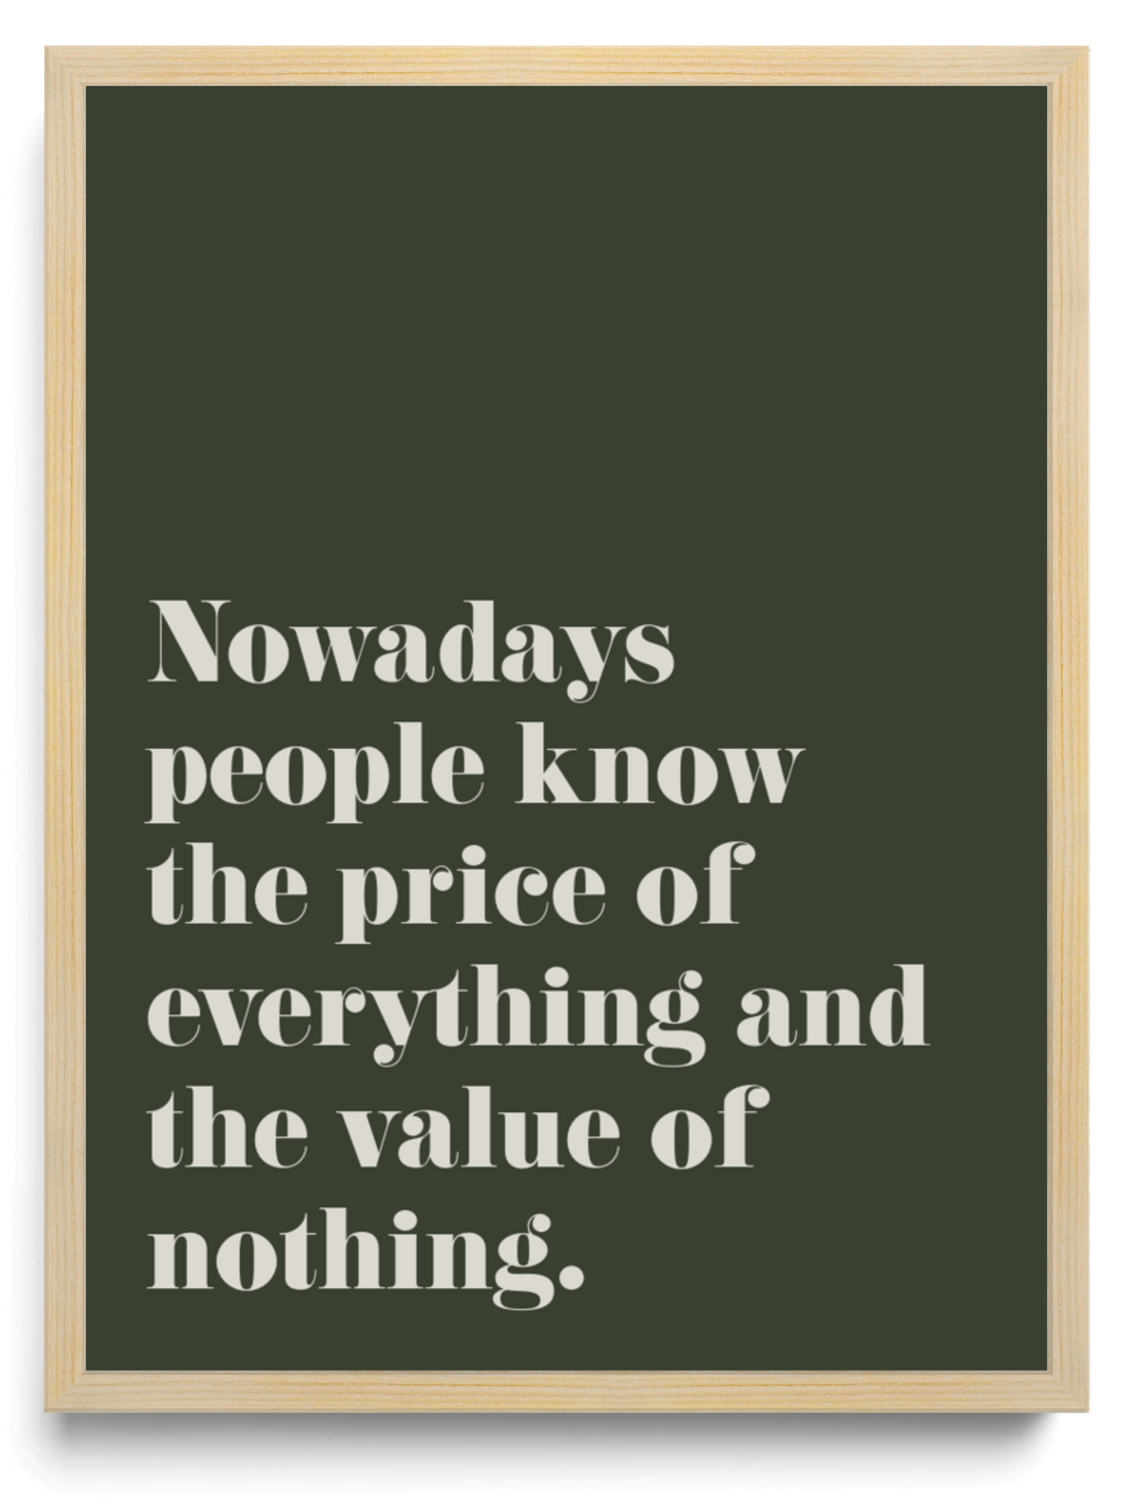 Nowadays people know the price of everything and the value of nothing framed typographic print